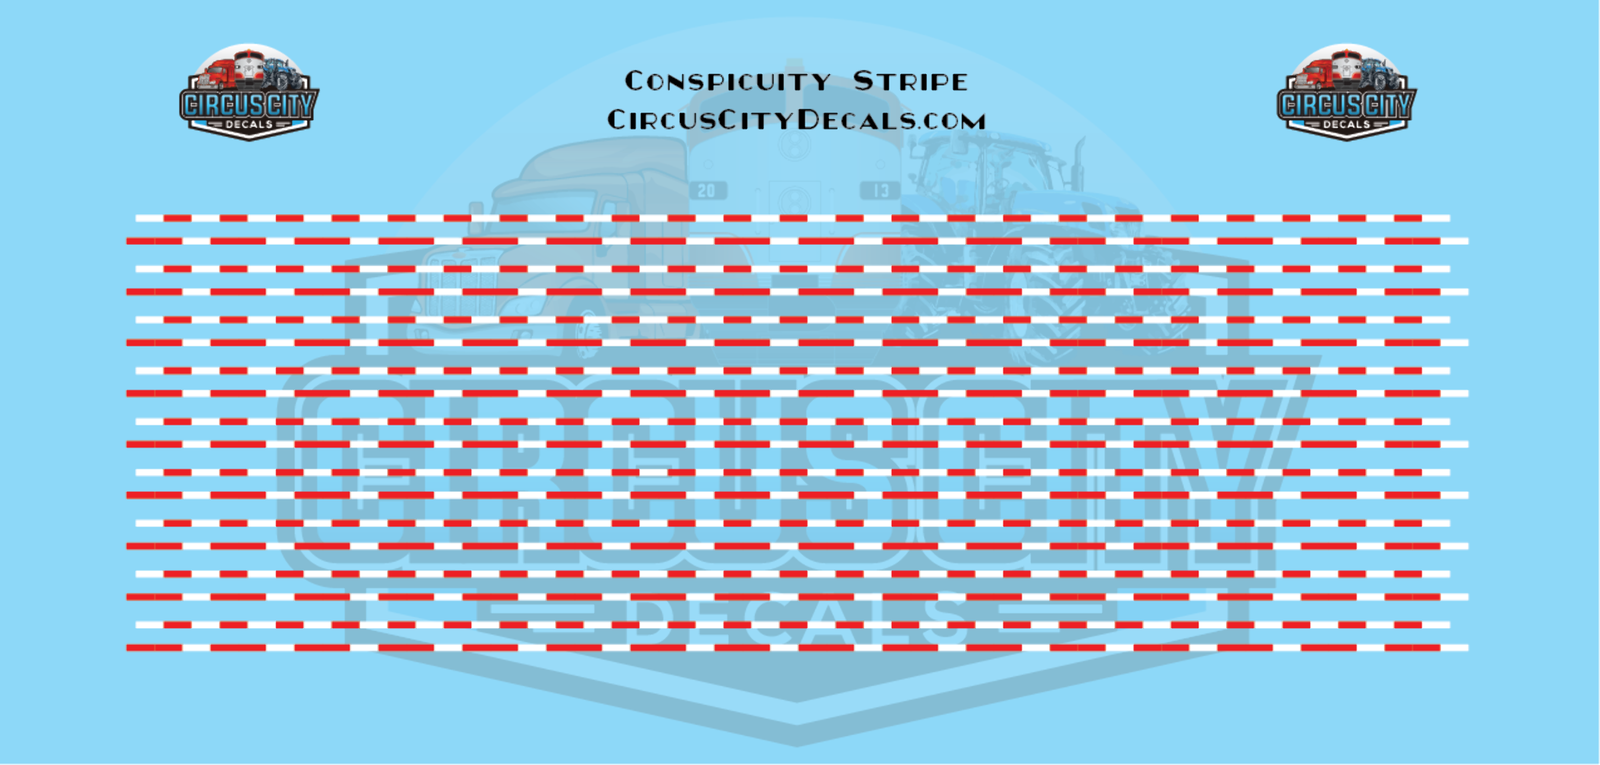 Conspicuity Stripe Cheap bargain for O Inventory cleanup selling sale 1:48 Vehicles Scale